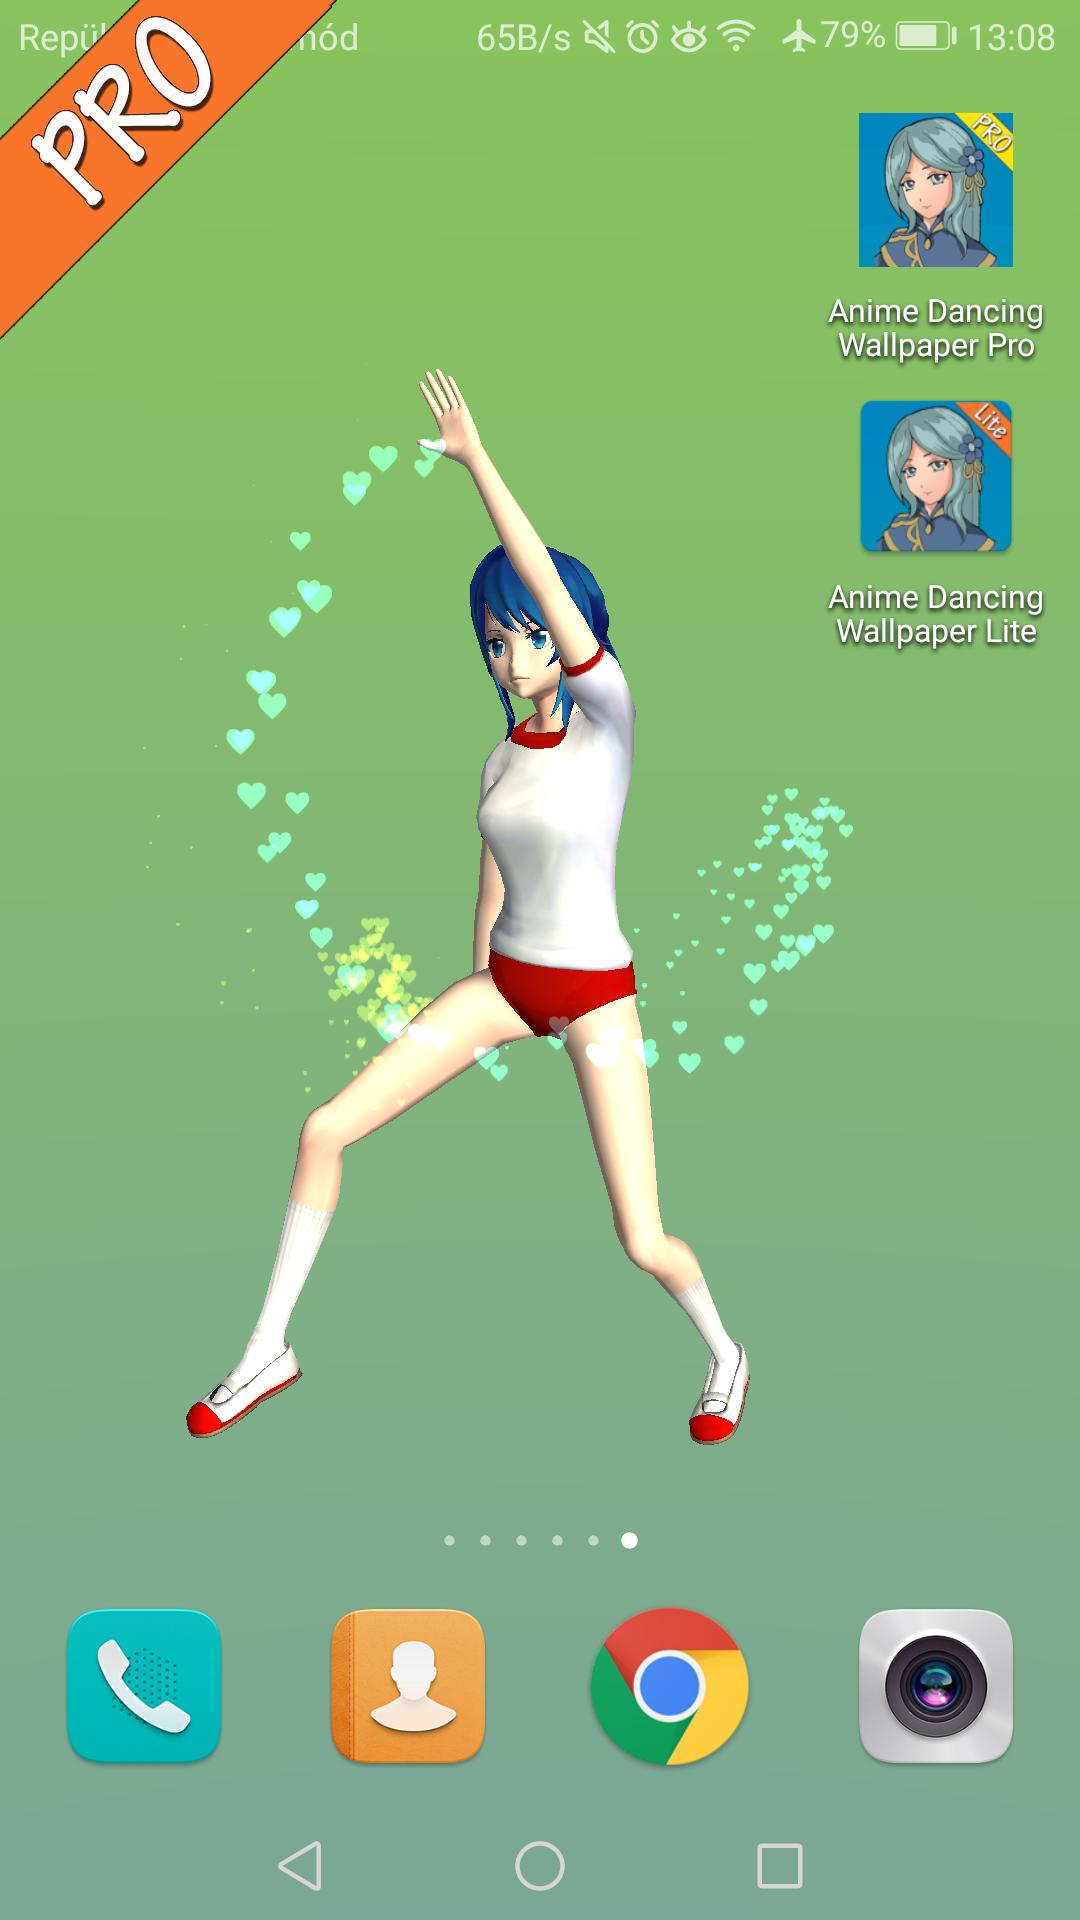 Anime Dancing Live Wallpaper Lite for Android - APK Download